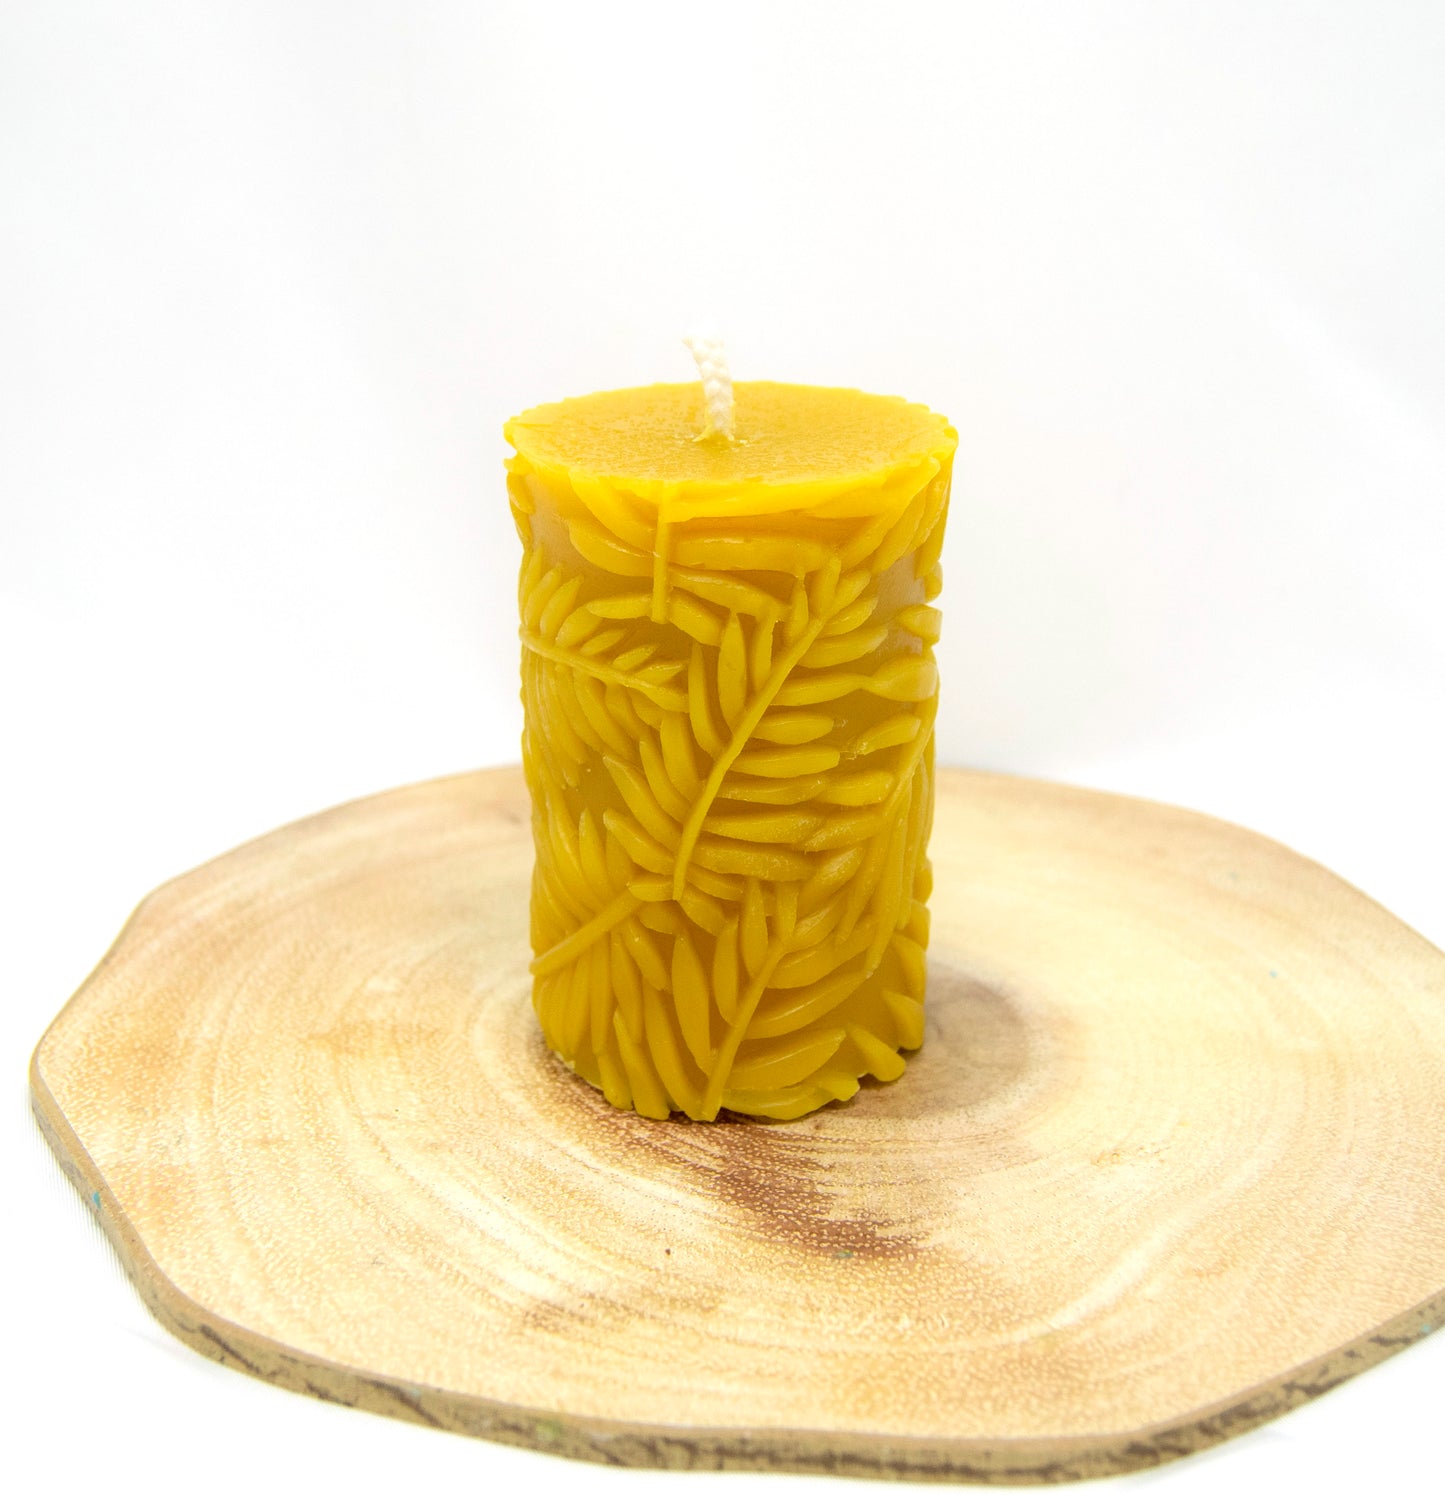 Handmade Beeswax Pillar Candle with Leaves